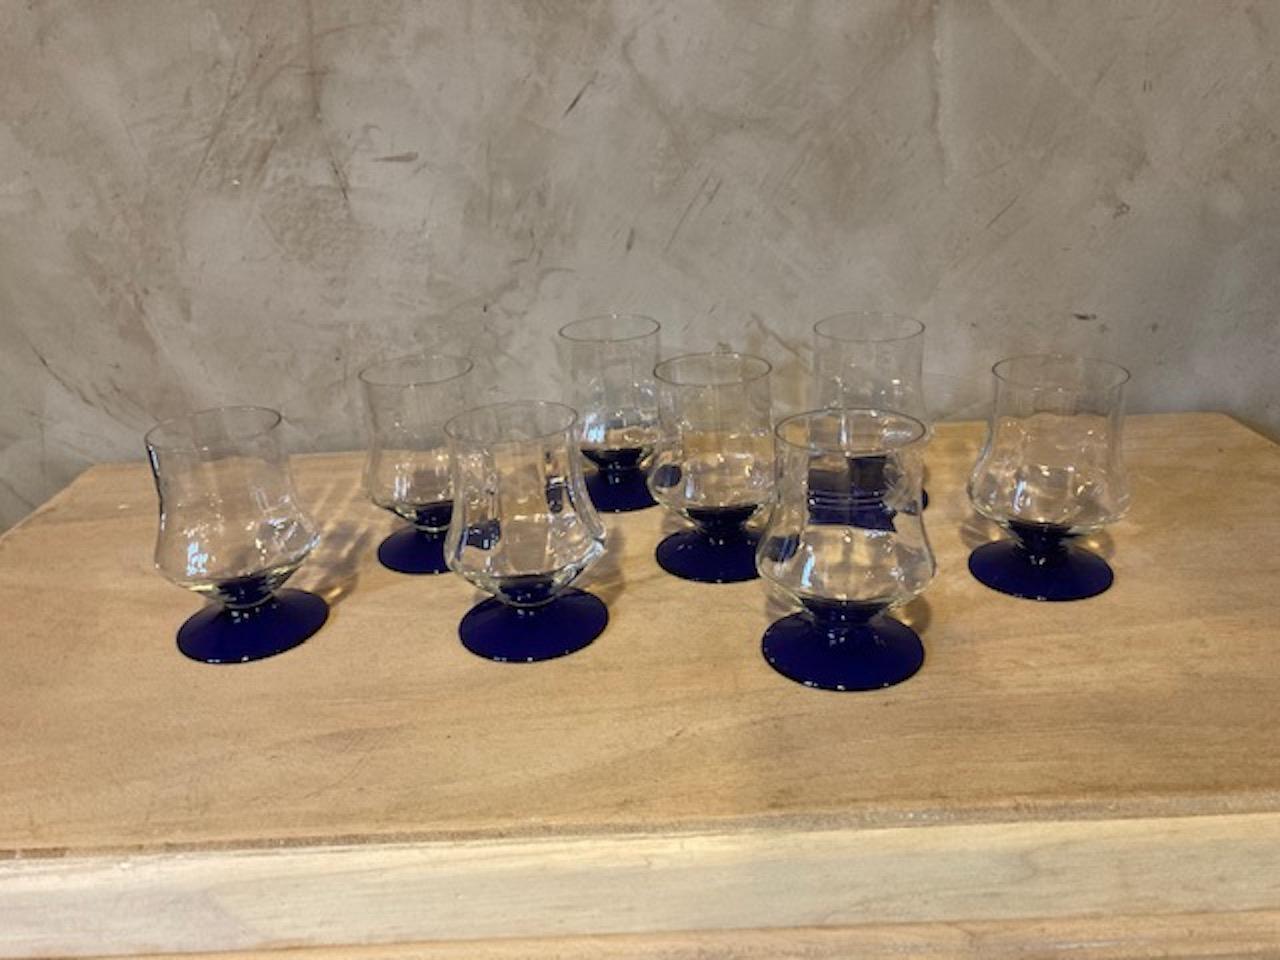 Very nice 20th century set of French Art Deco engraved glasses from 1930s.
Blue base with engraved flower.
Four types of glasses :
- 8 water glasses : 10 cm height x diameter 7 cm
- 6 wine glasses : 8,5 cm height x 5,5 diameter
- 8 porto